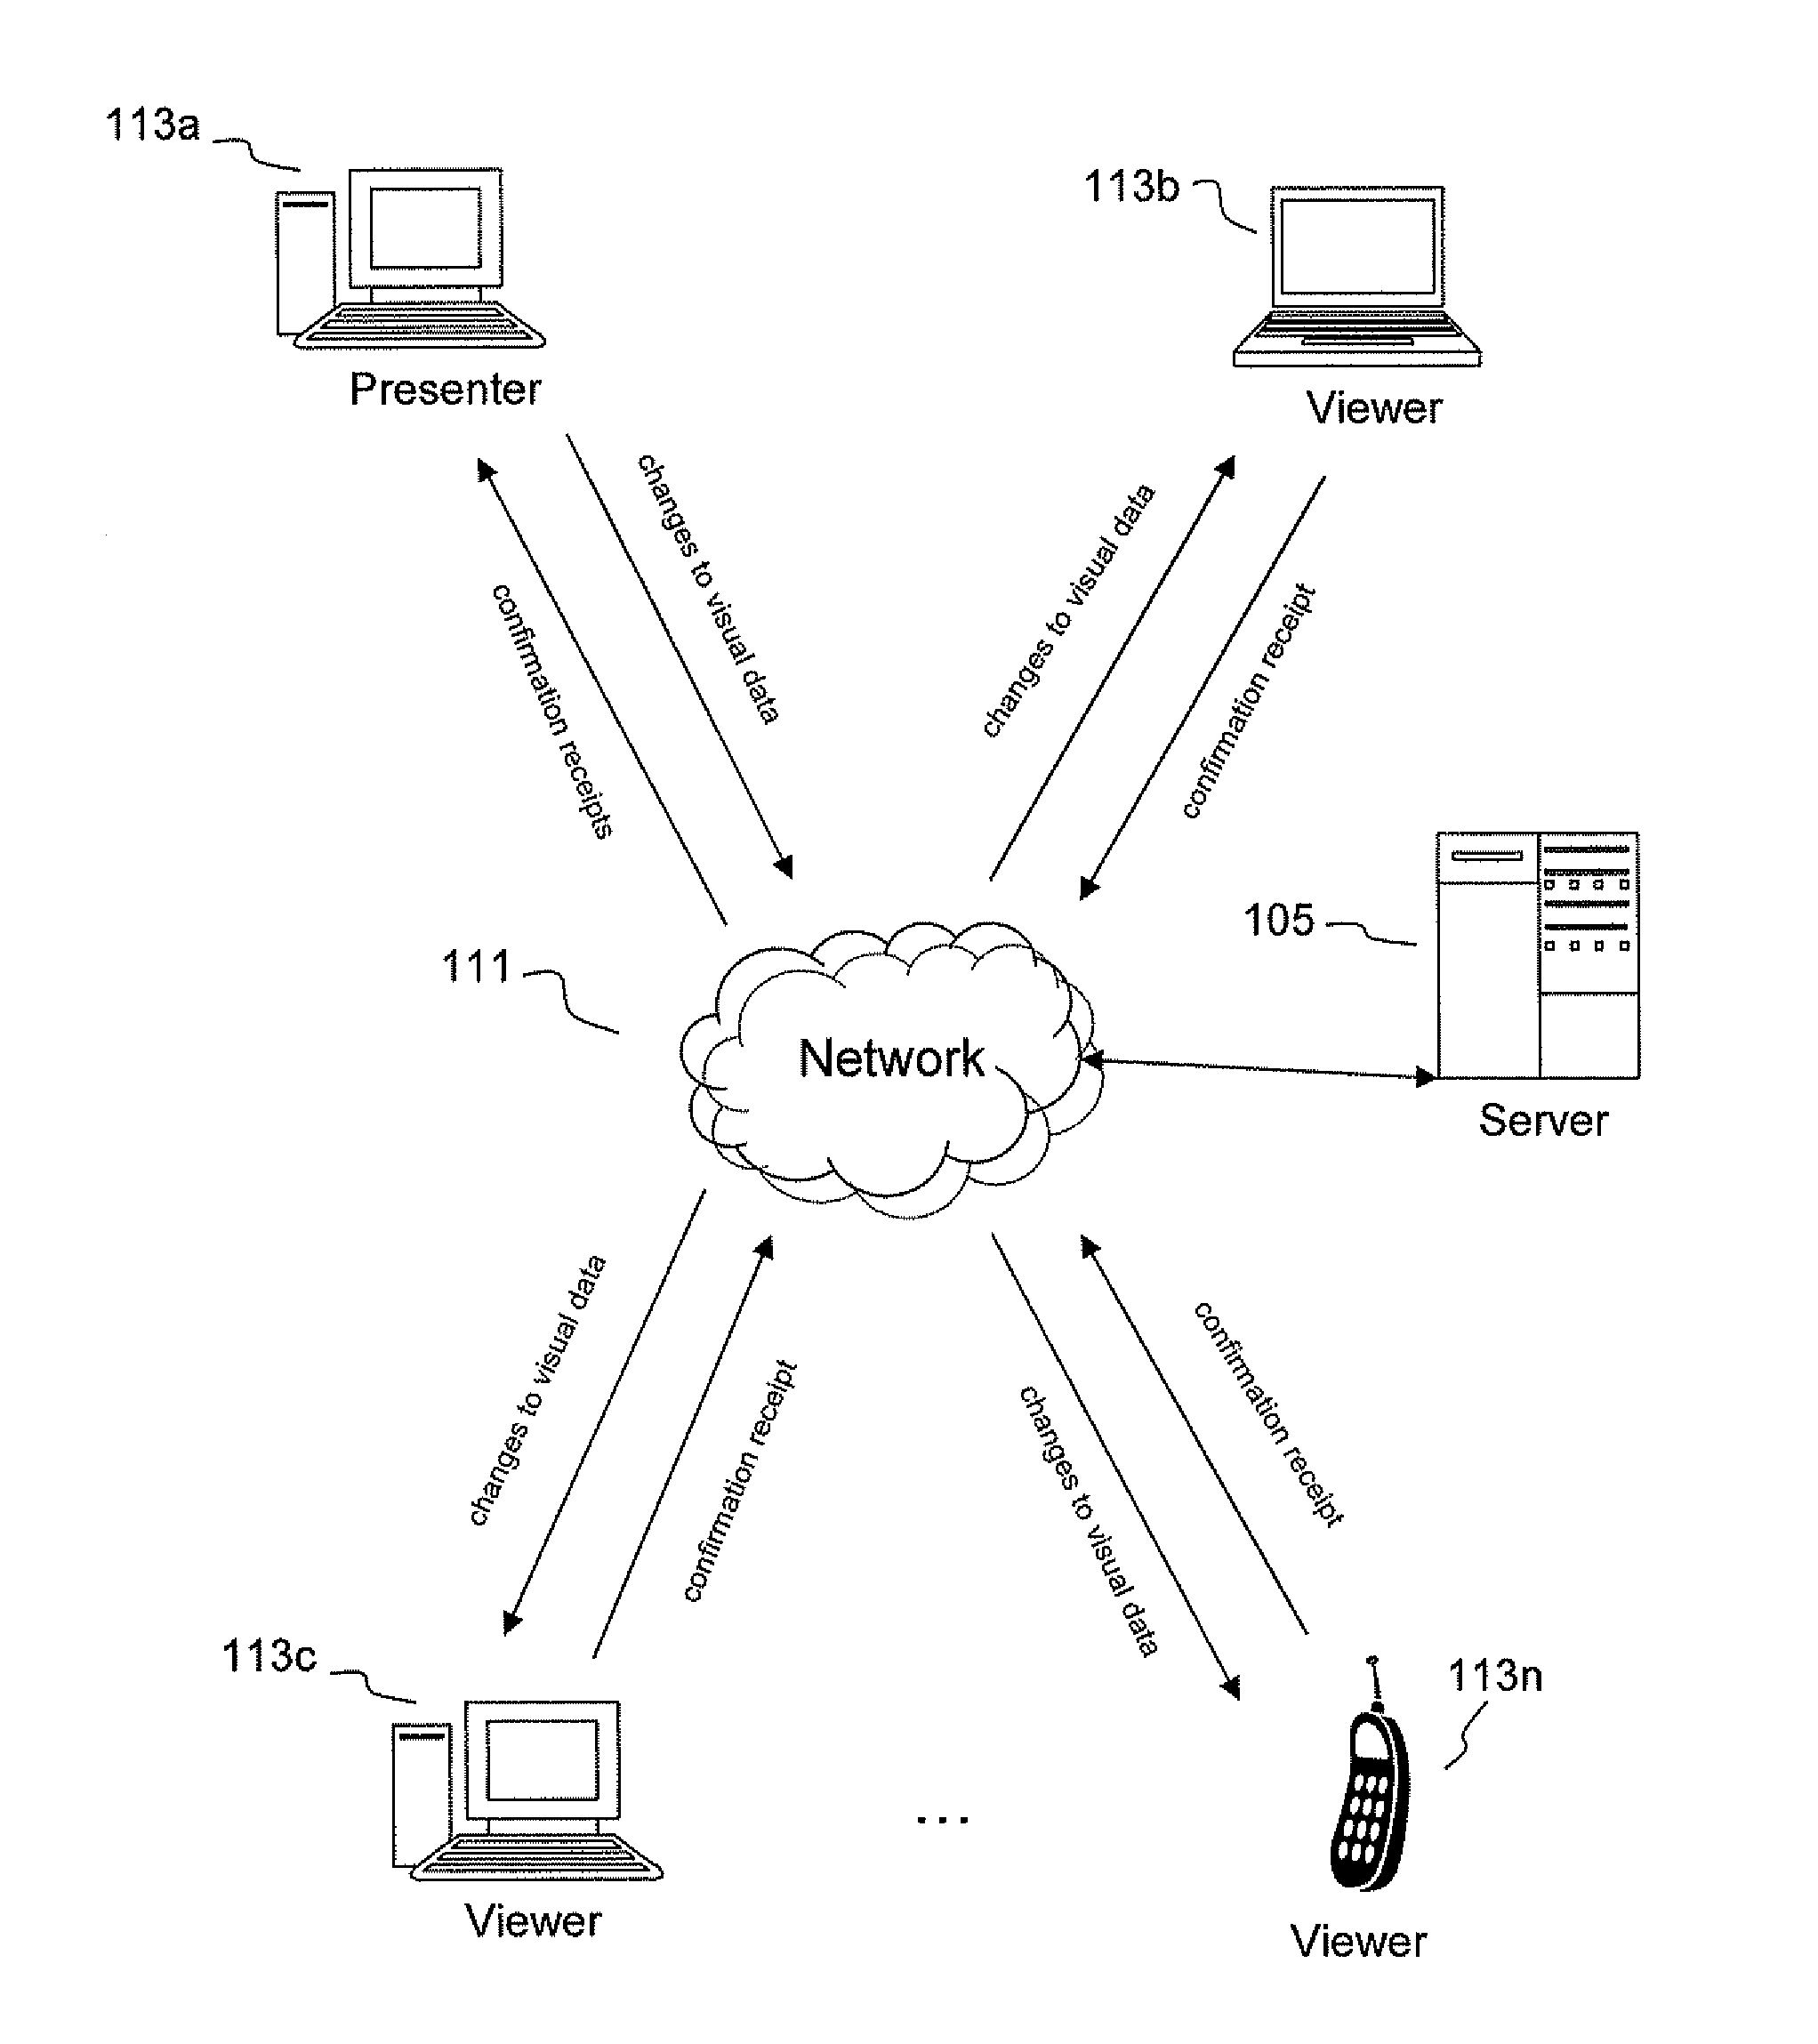 Systems and methods for displayng to a presenter visual feedback corresponding to visual changes received by viewers